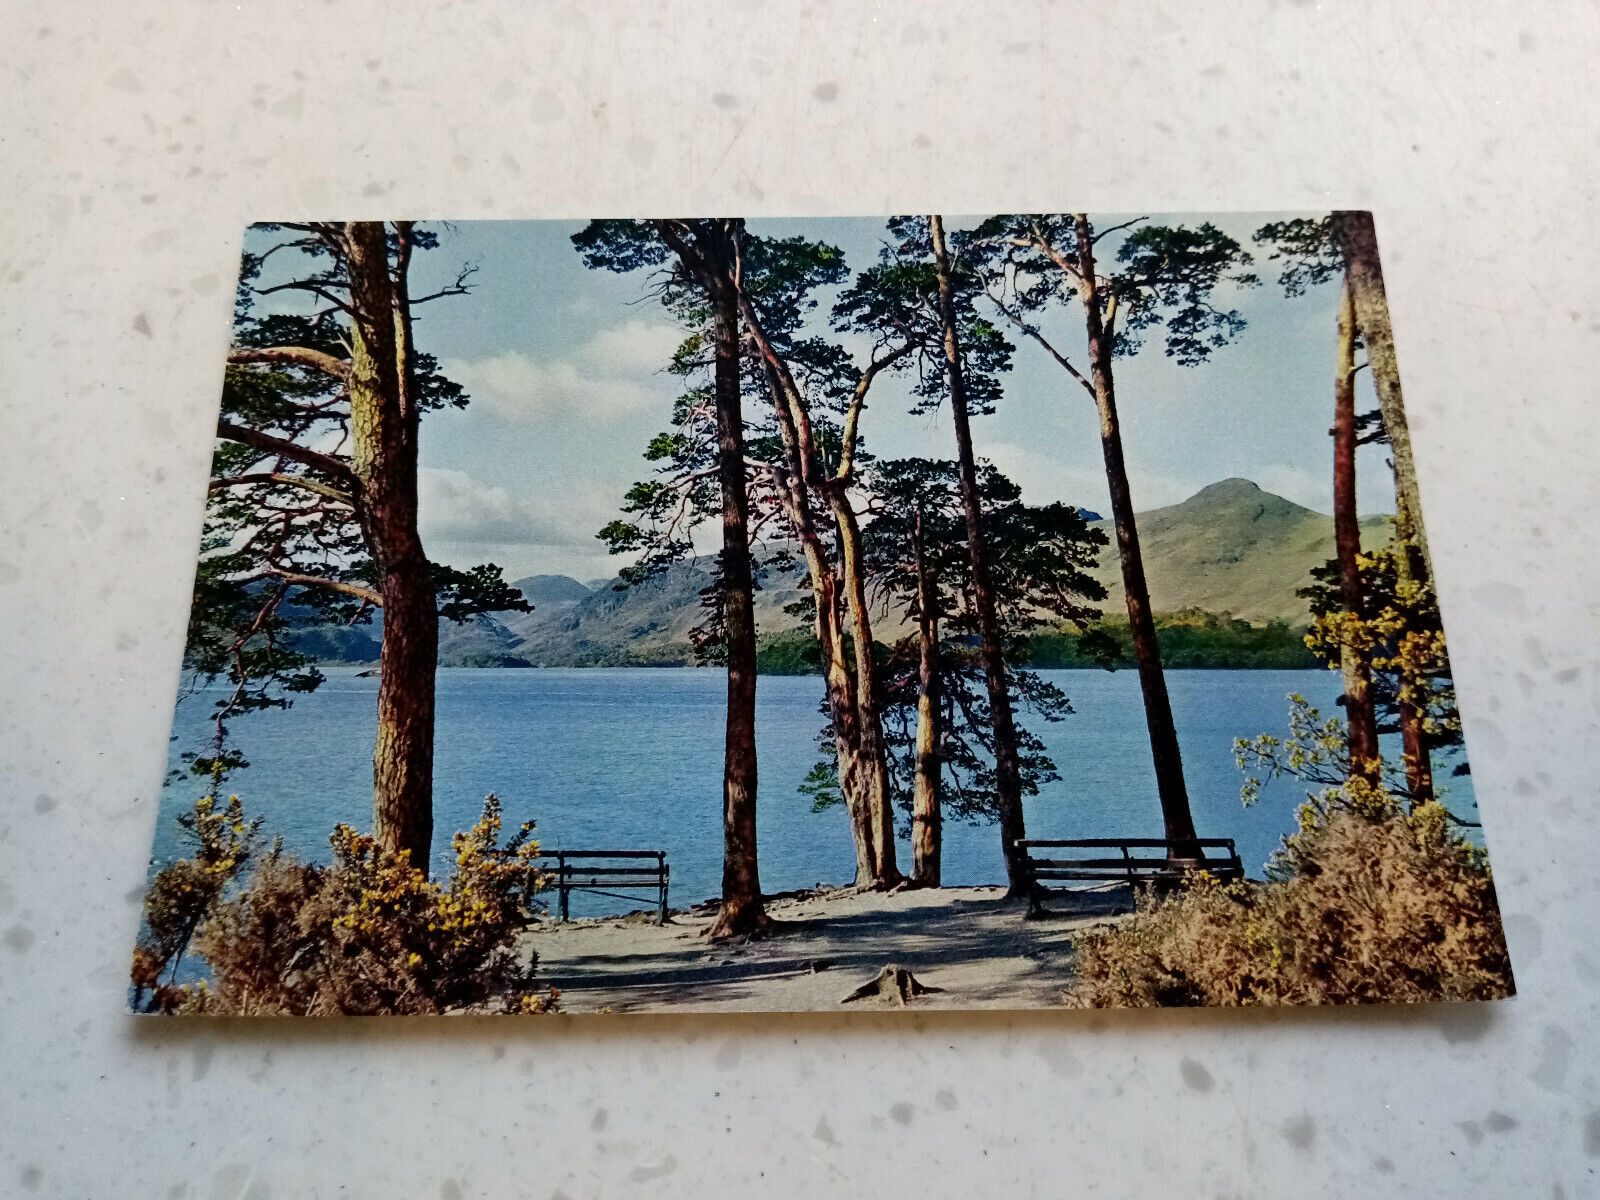 House Clearance - Service Derwentwater from Friar's Crag Keswick Service